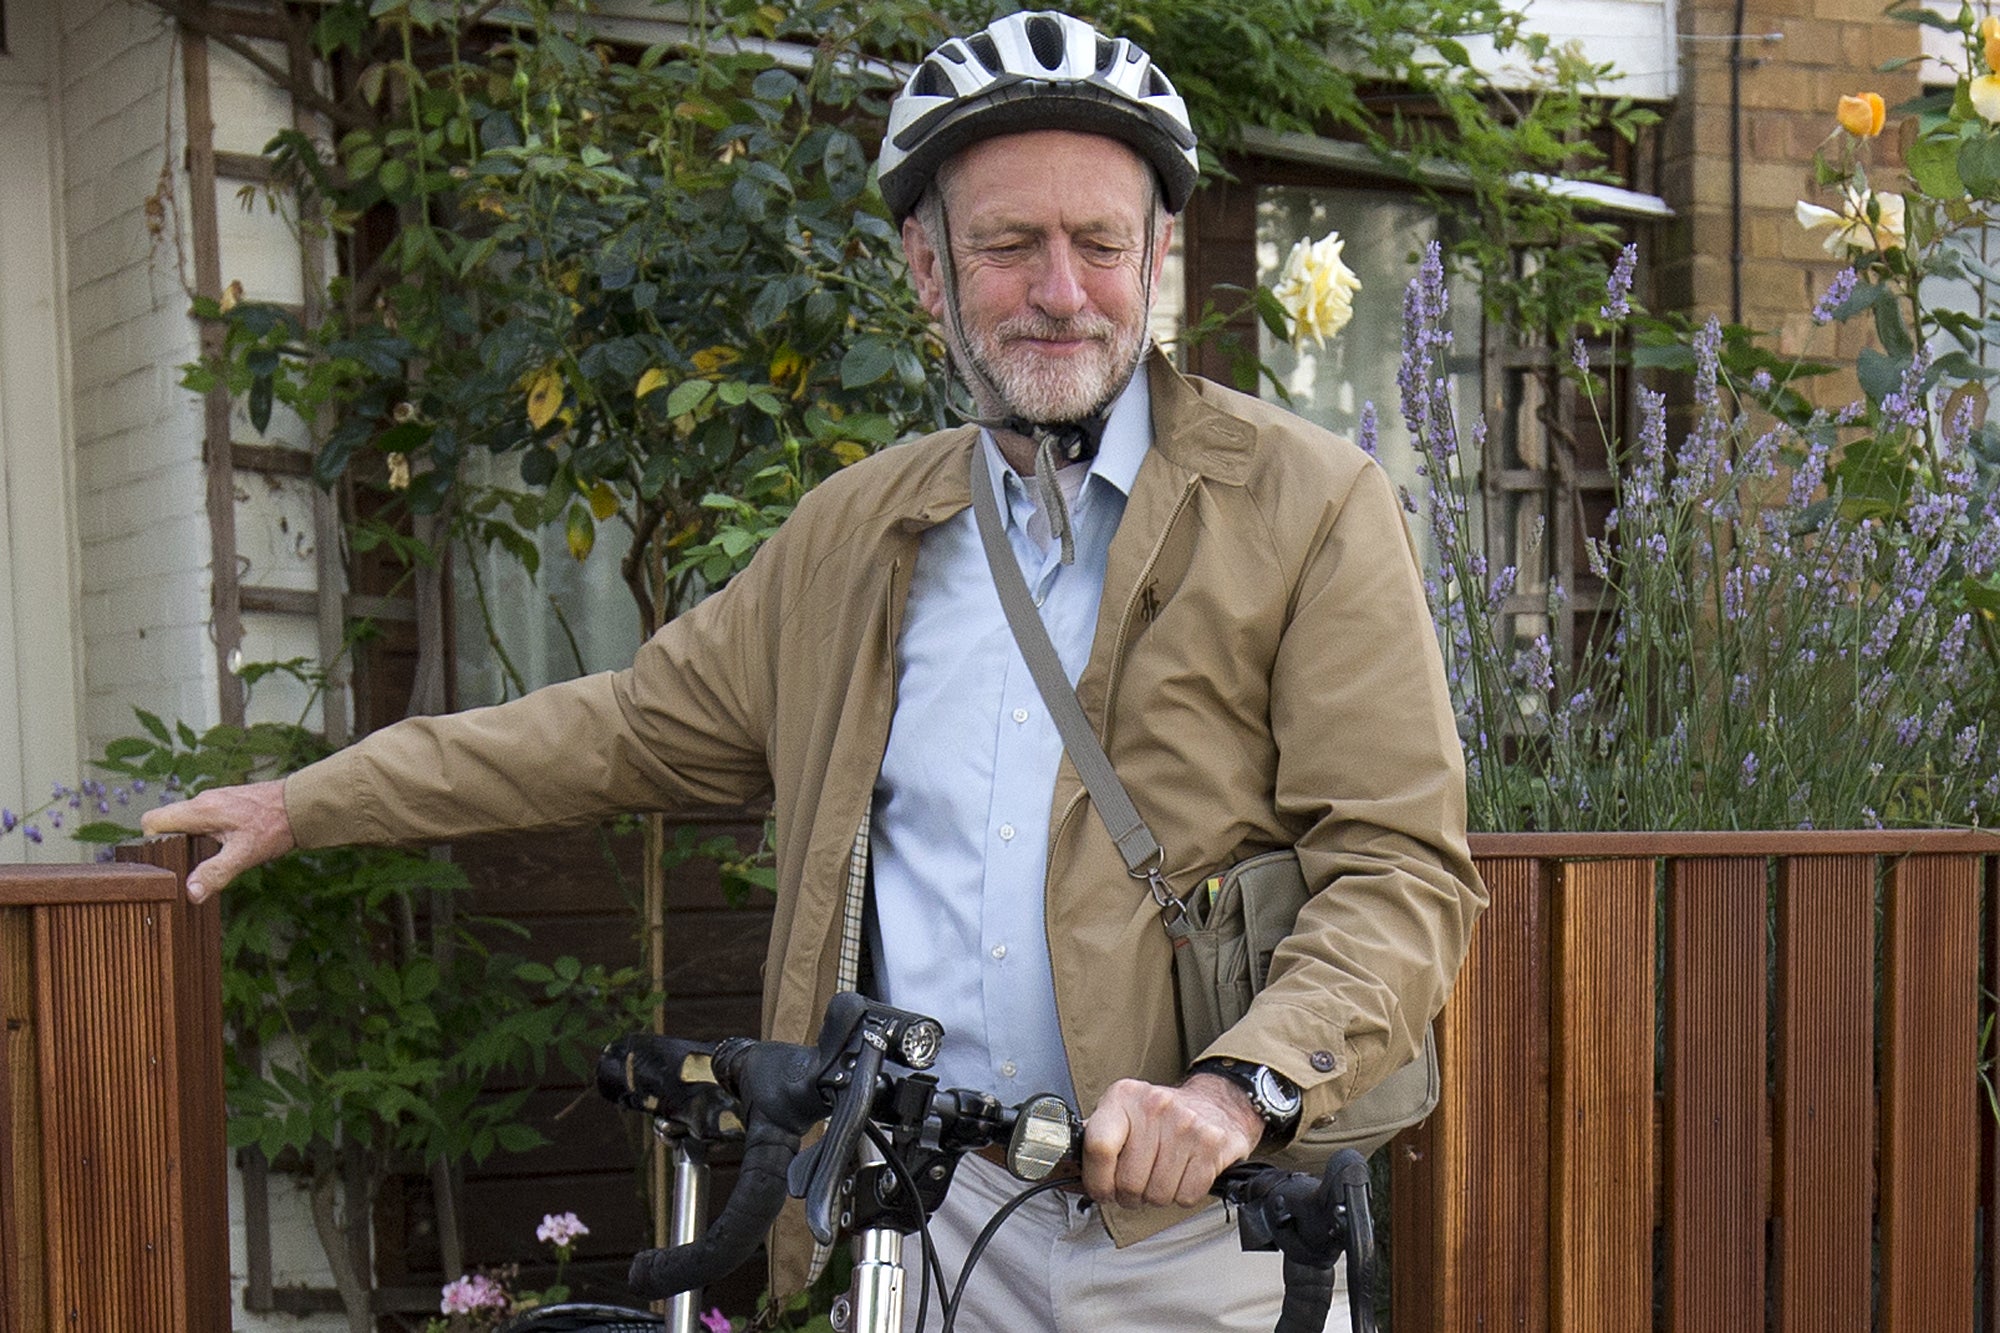 Jeremy Corbyn leaves his home by bicycle on Wednesday in London